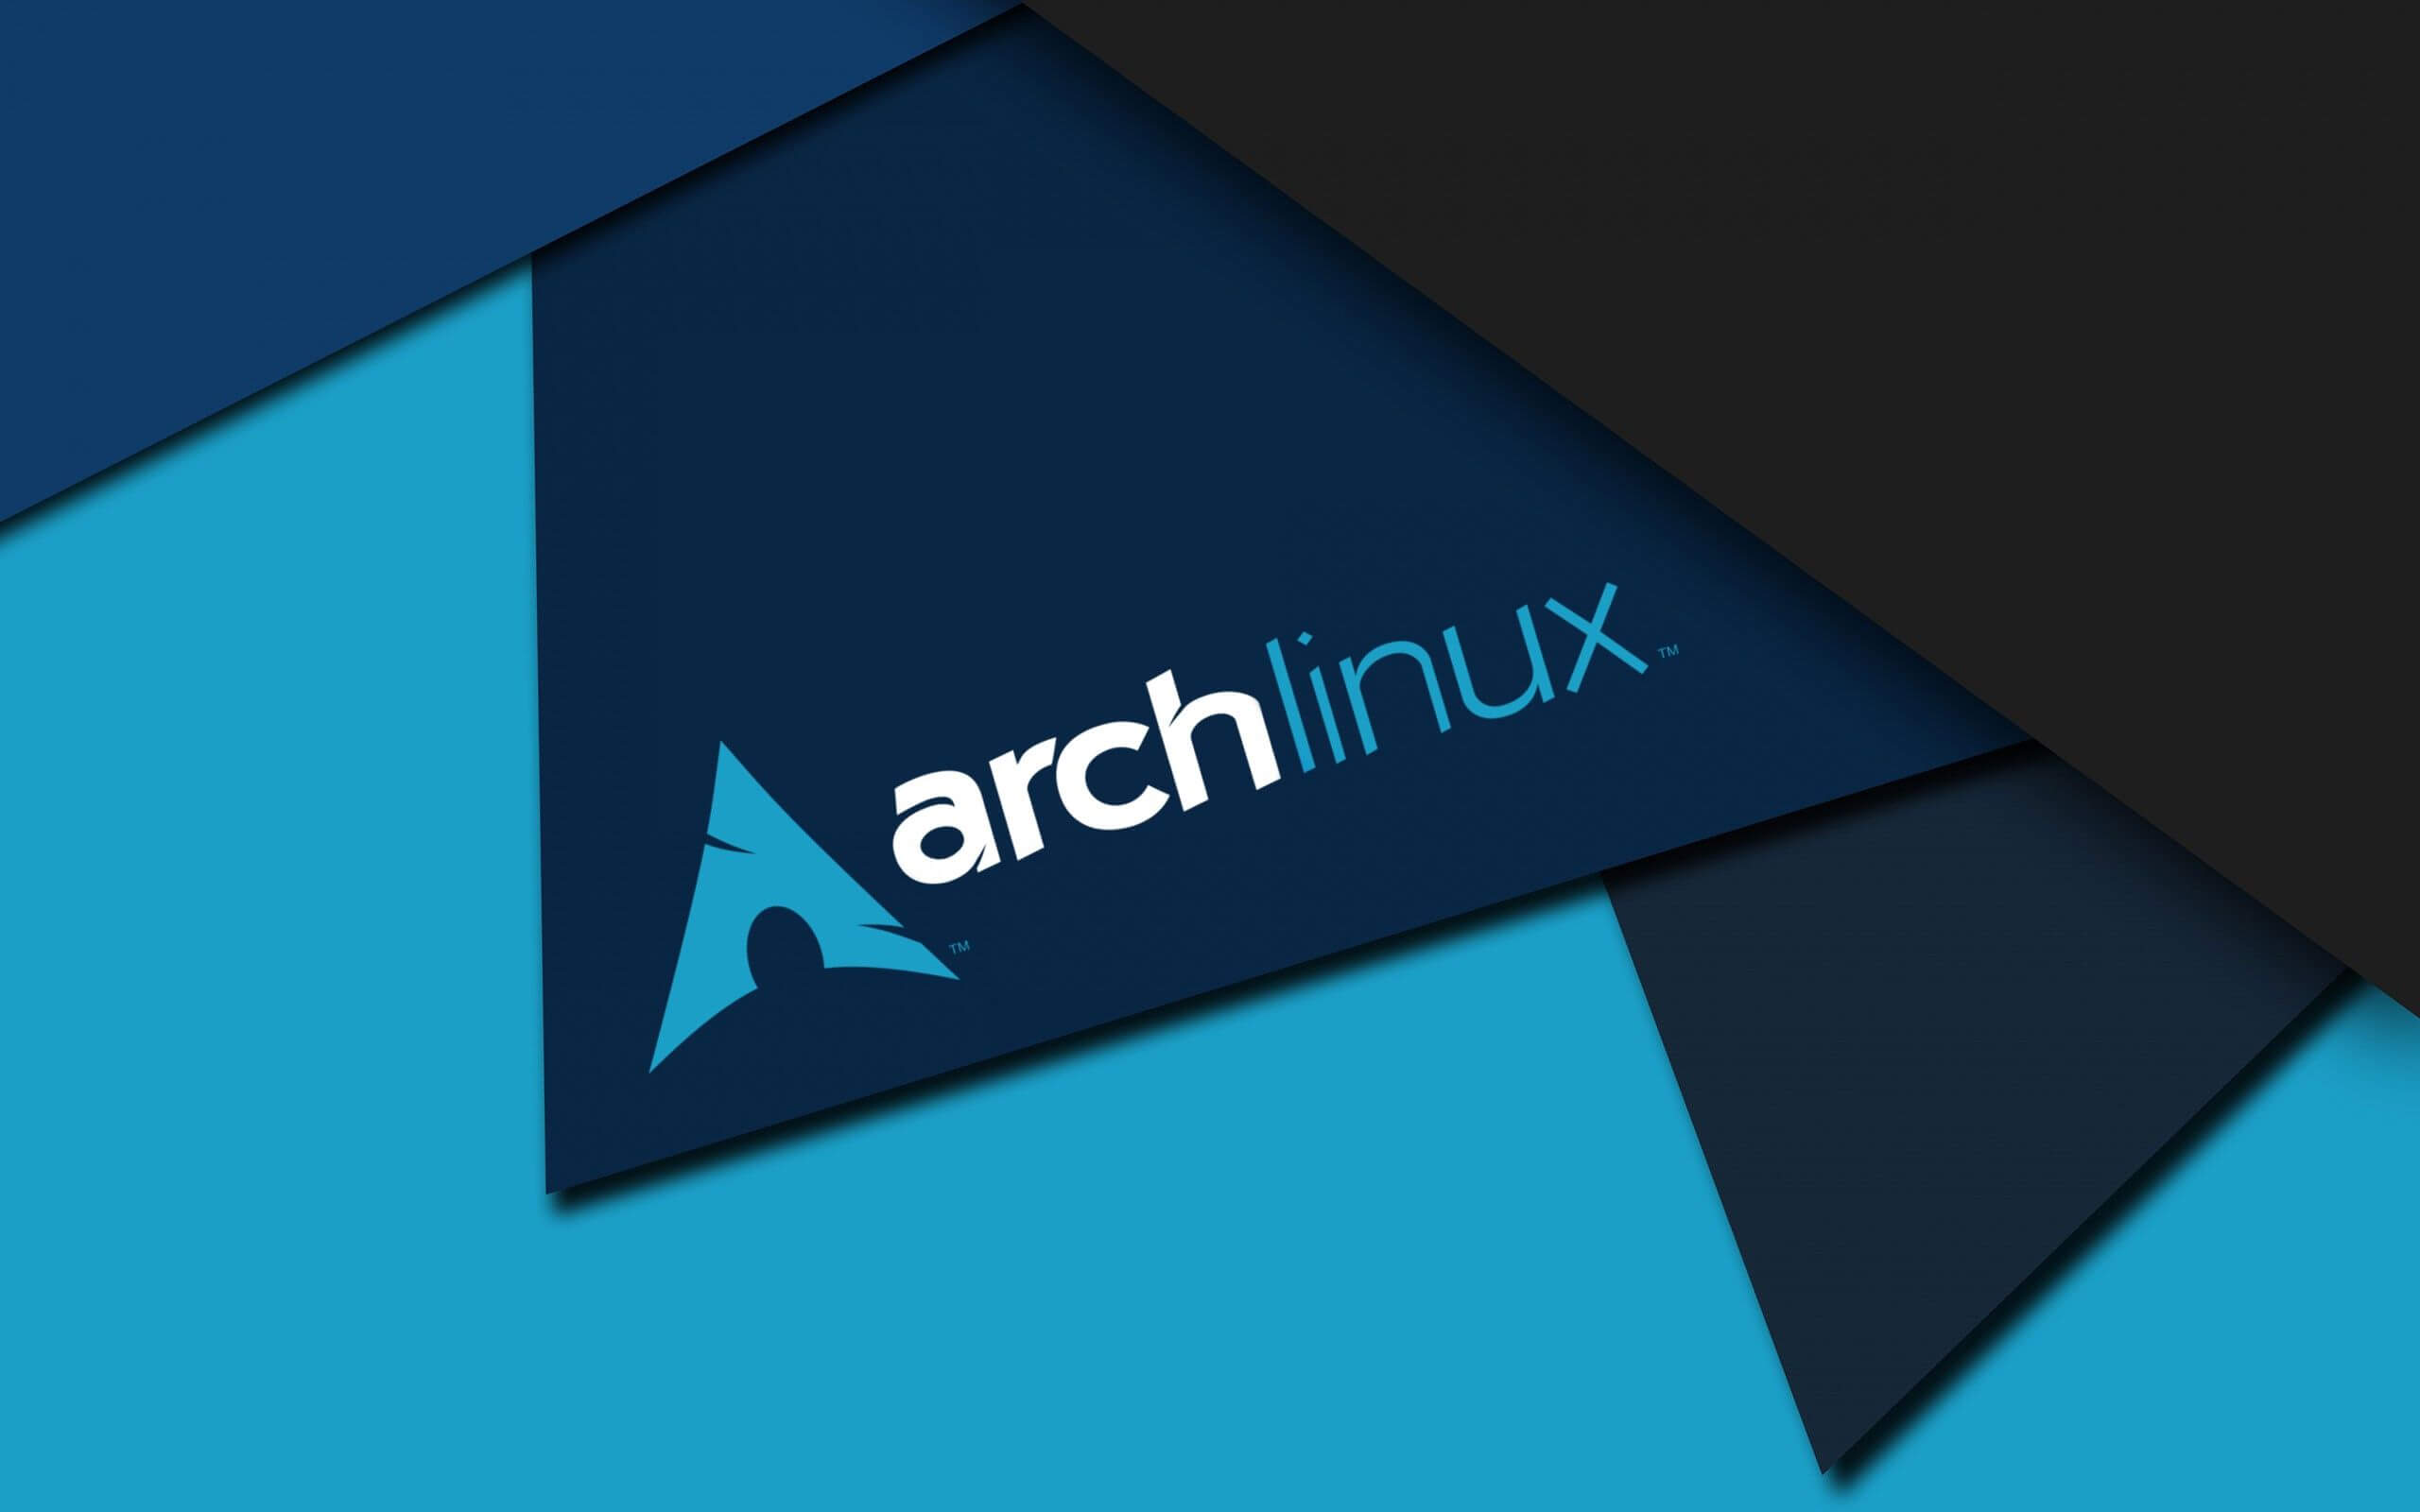 how to install arch linux